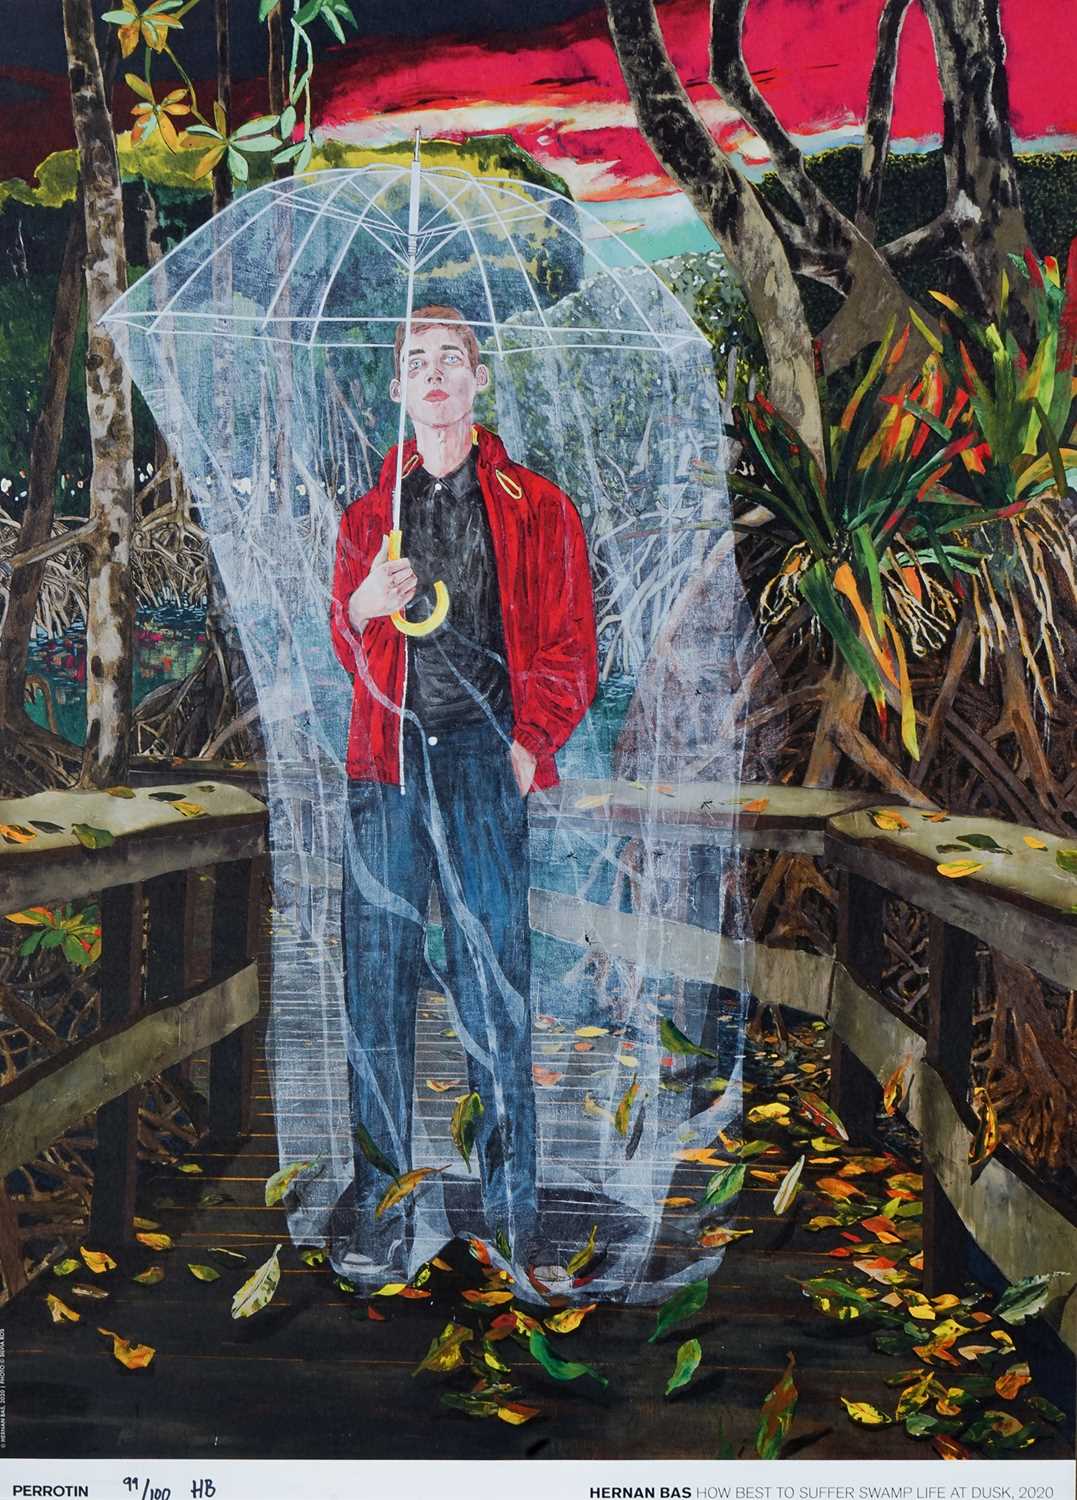 Lot 46 - Hernan Bas (American 1978-), 'How To Best Suffer Swamp Life At Duck', 2020